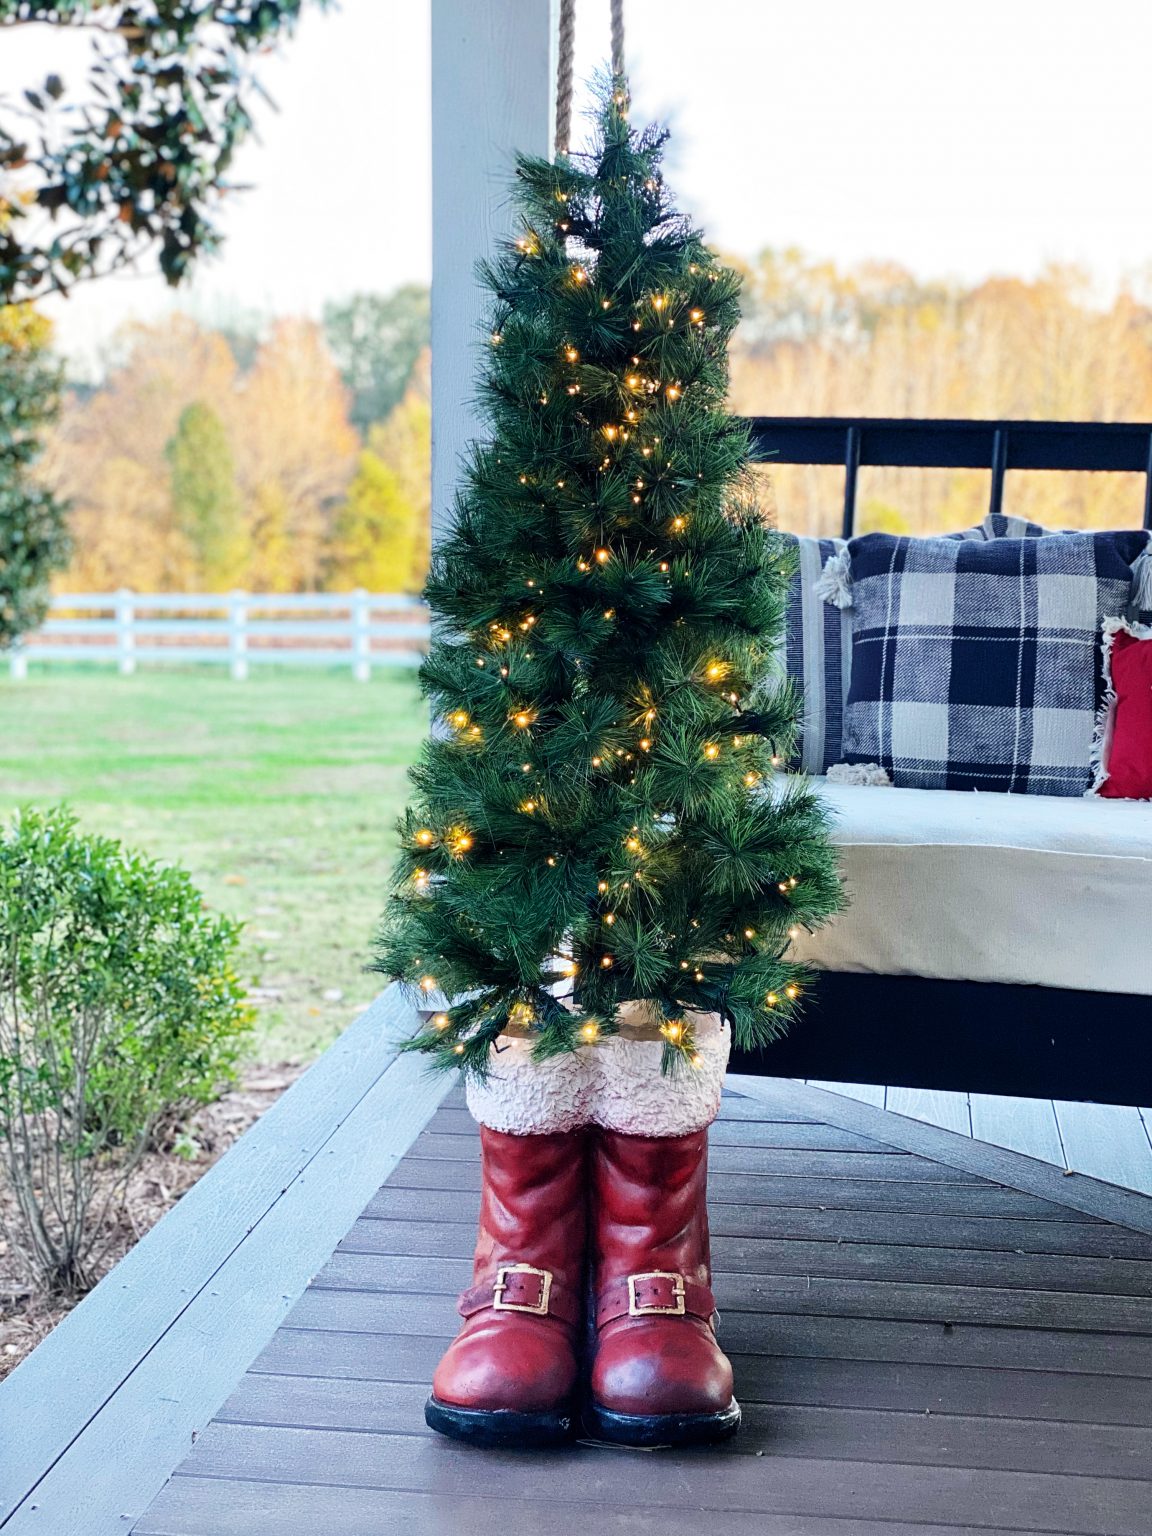 Decking the Halls with Christmas Tree Shops & More - Allie Crowe